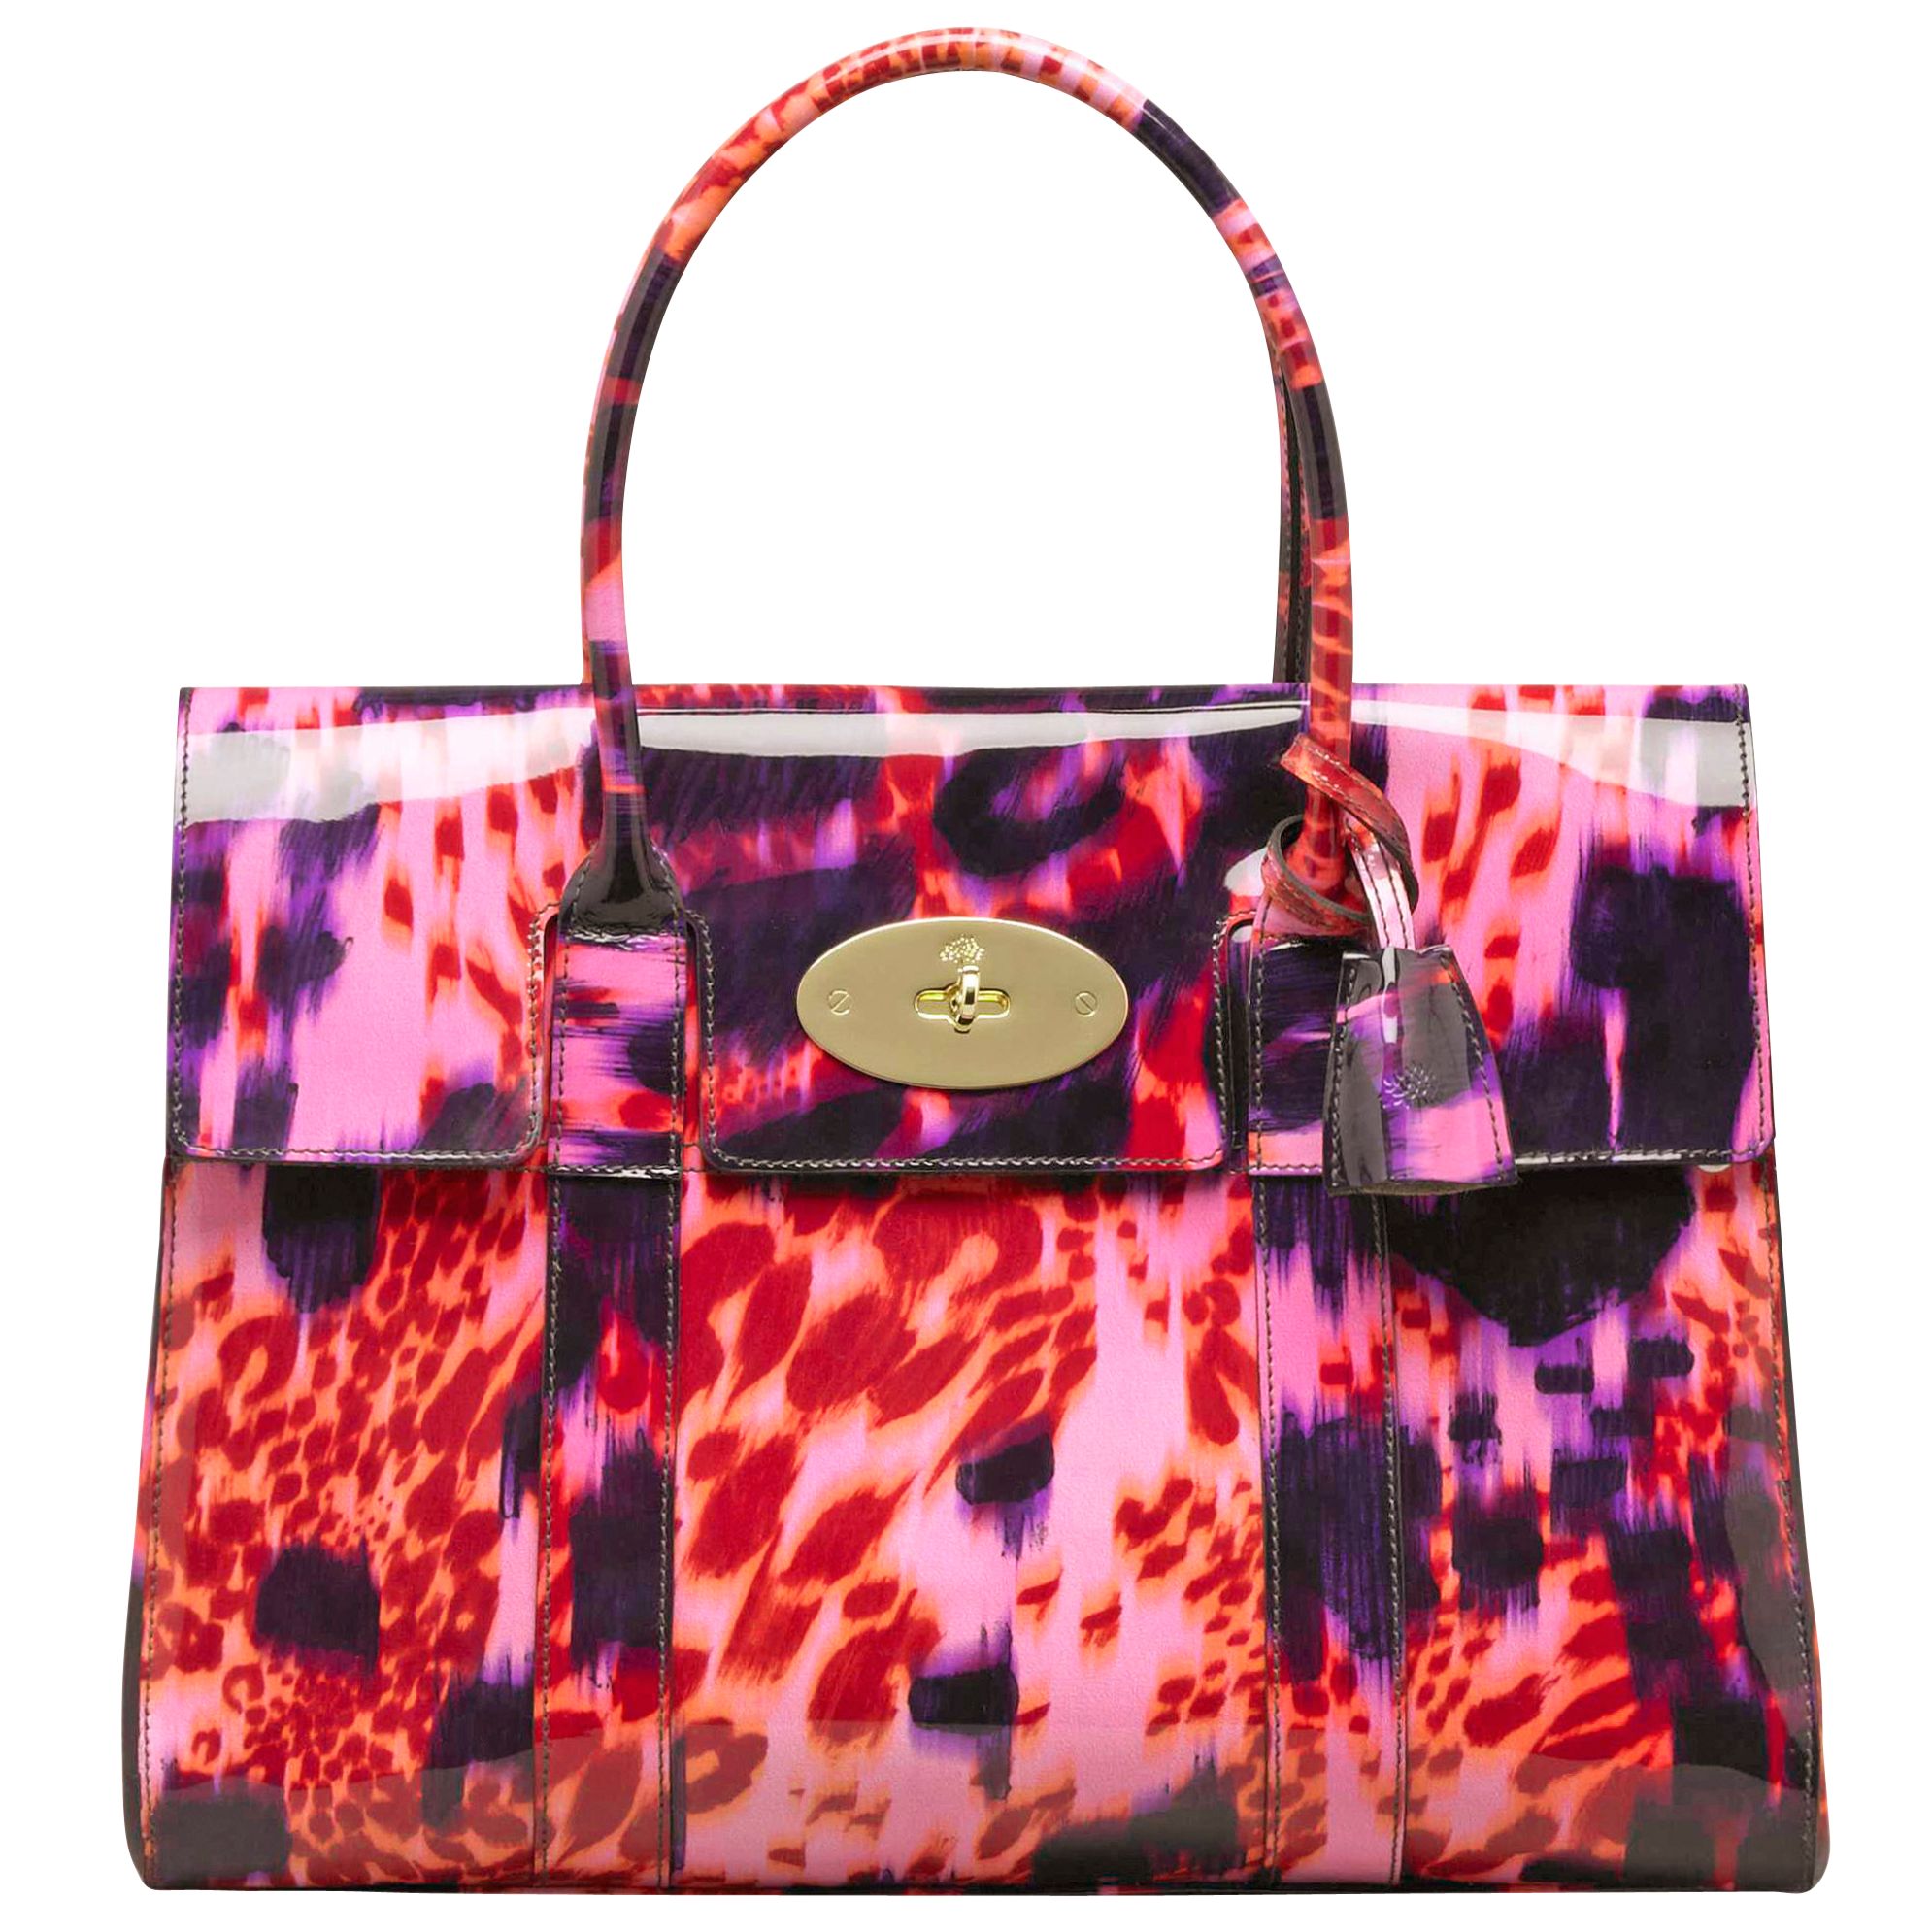 Mulberry Bayswater Loopy Leopard Patent Leather, Plum at John Lewis